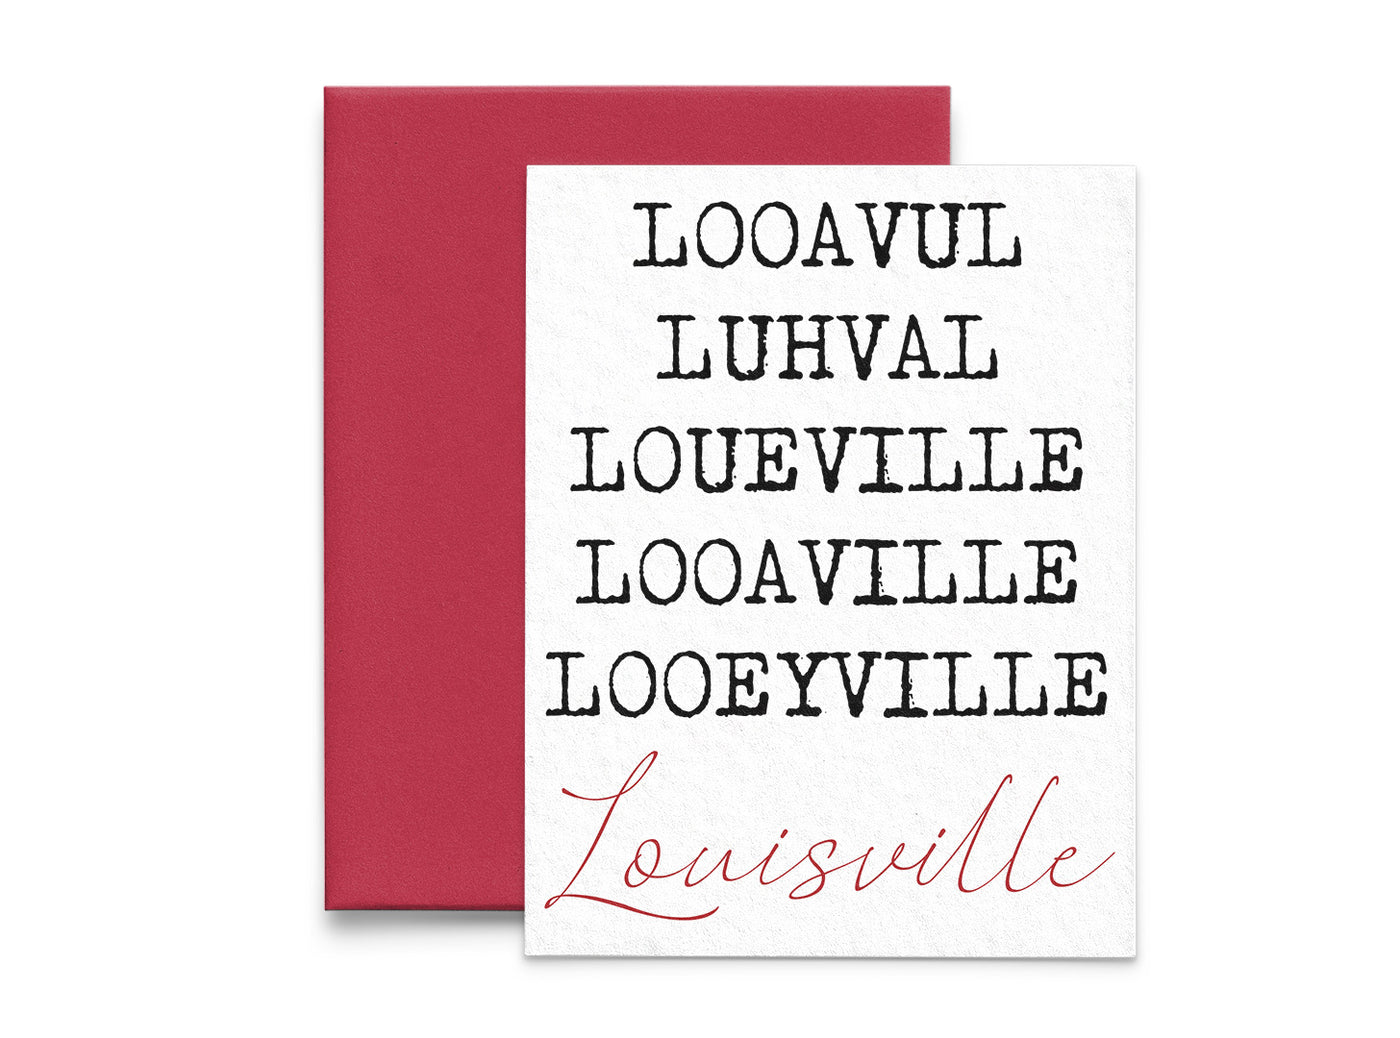 Pronounce Louisville Local Love Greeting Card